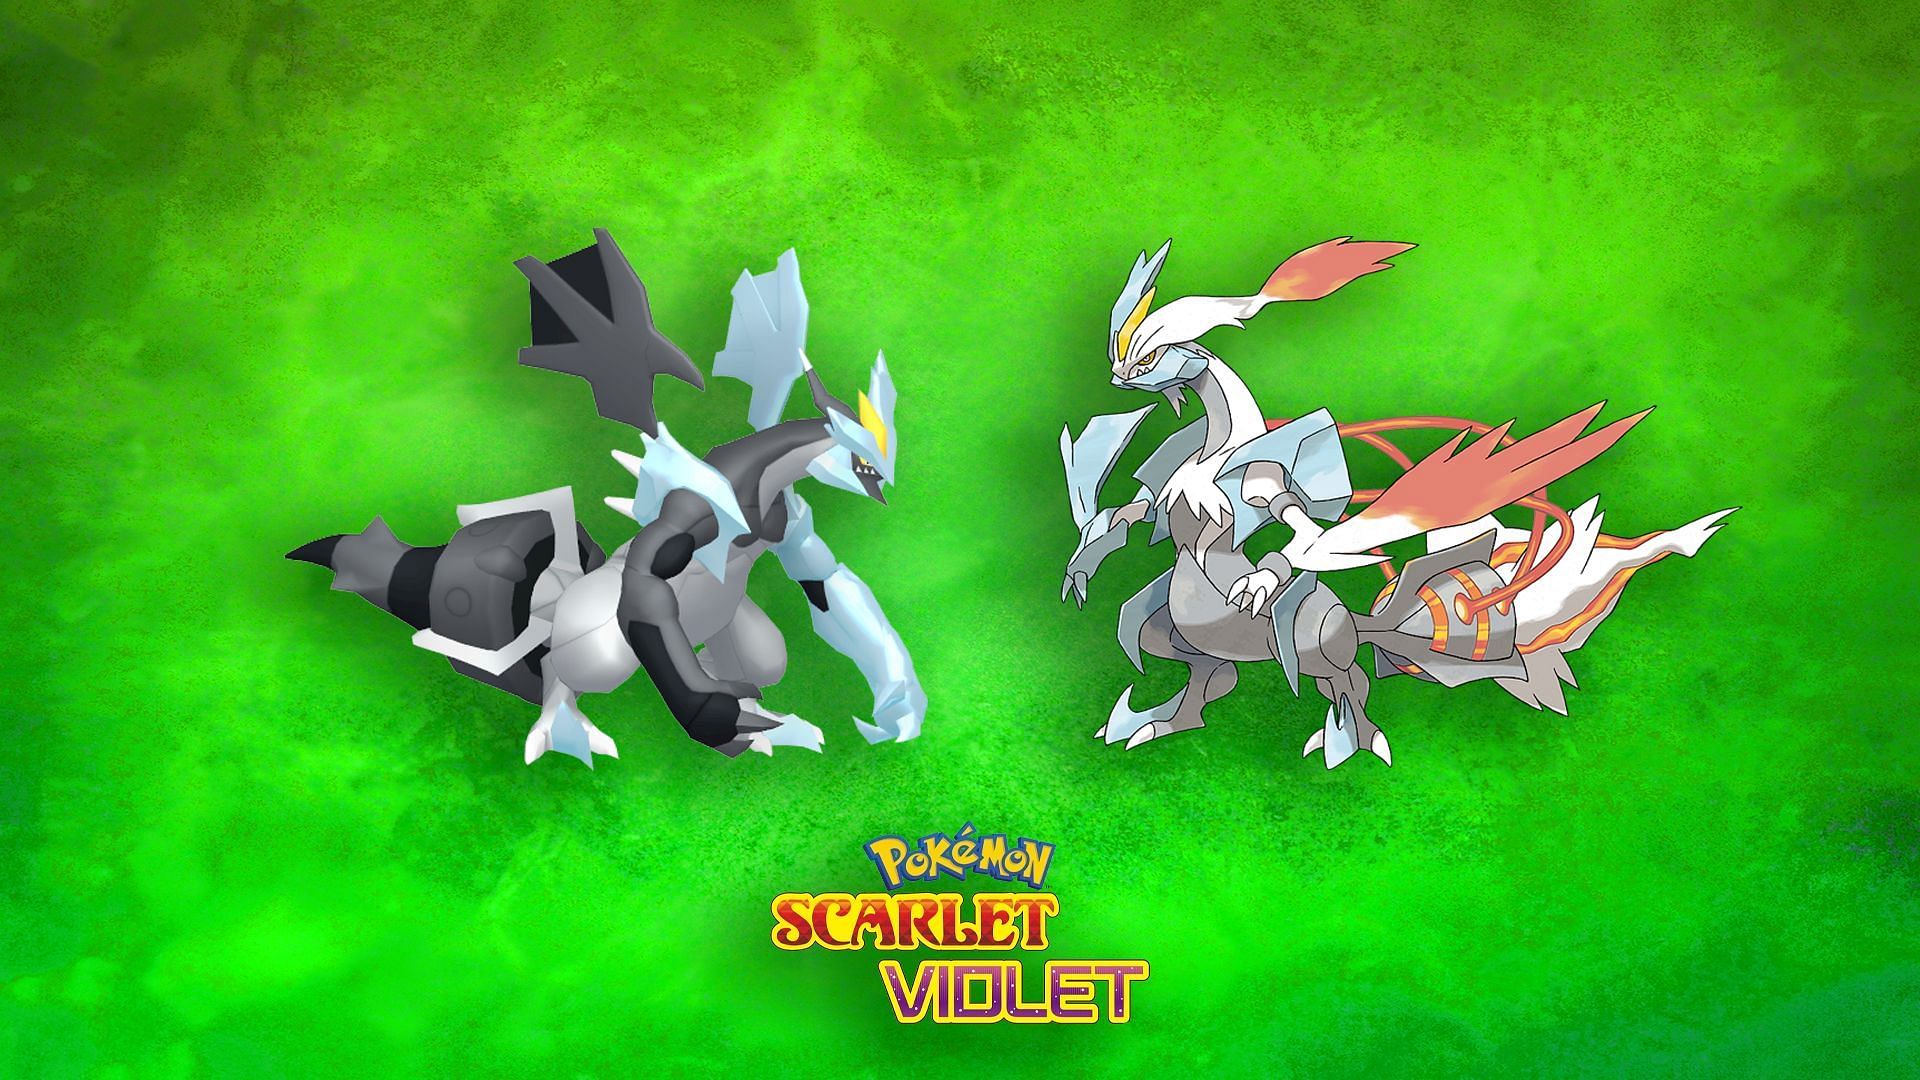 Black or White Kyurem is crucial for the glitch (Image via The Pokemon Company)